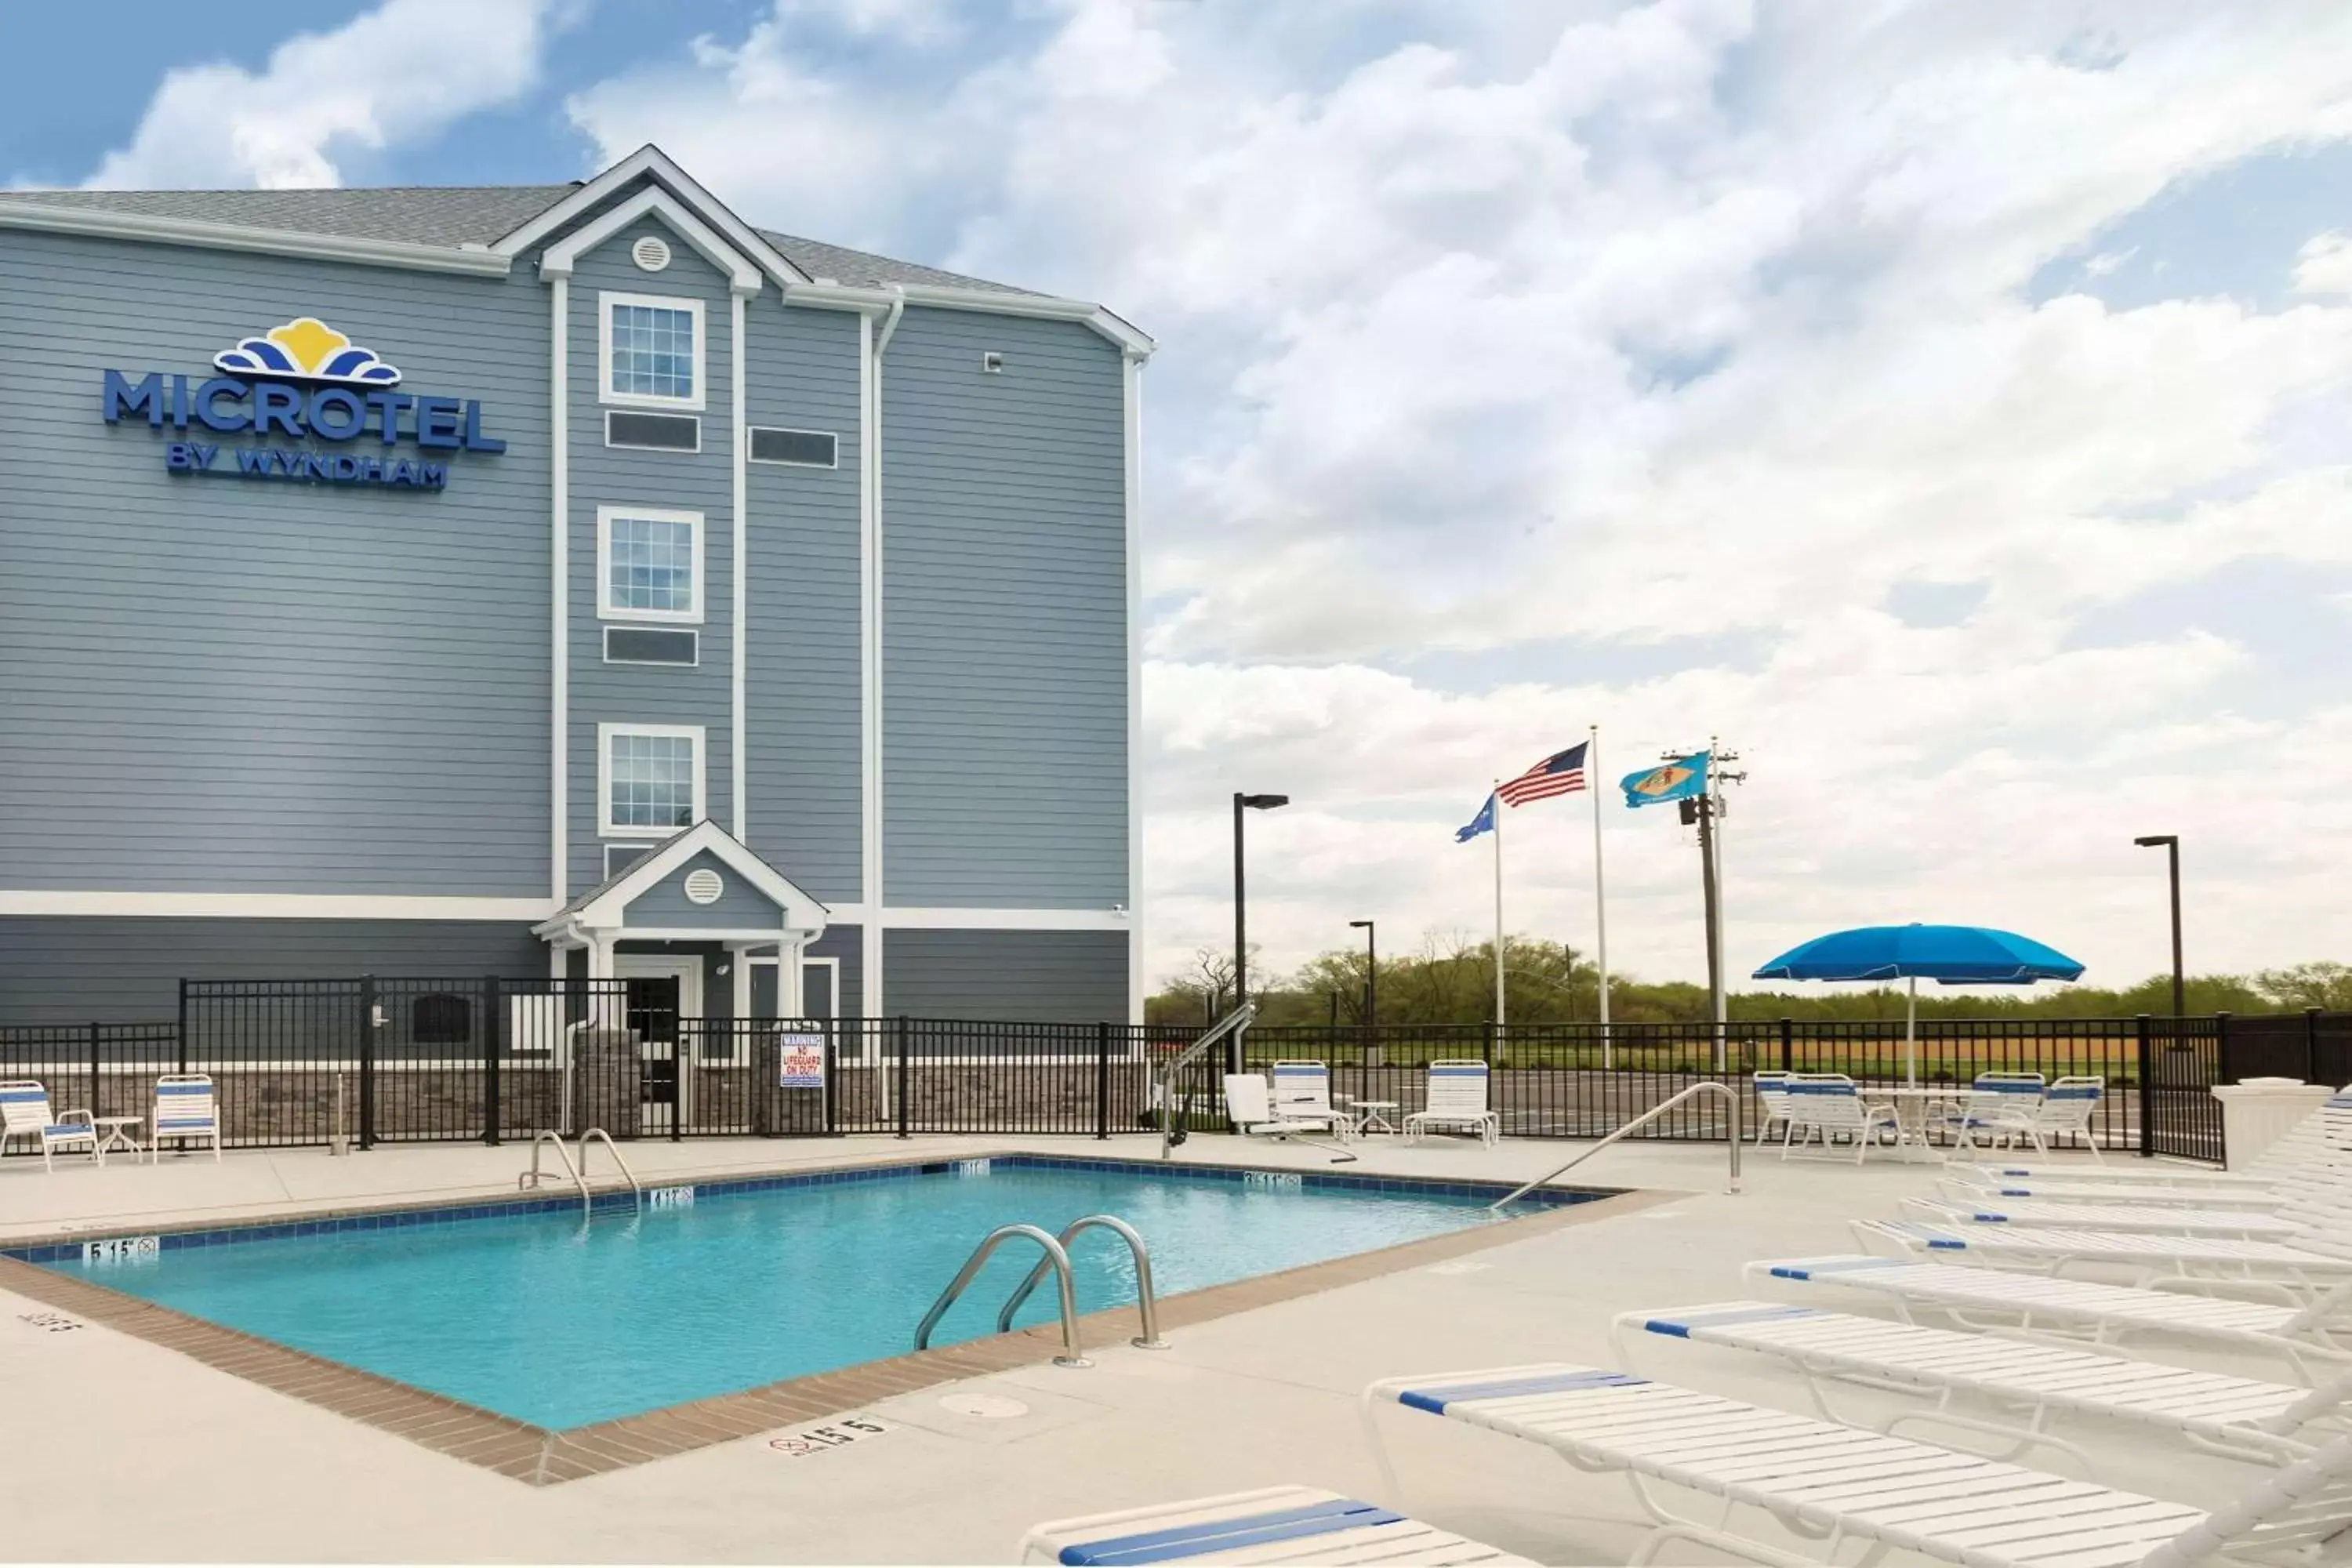 On site, Property Building in Microtel Inn & Suites by Wyndham Georgetown Delaware Beaches